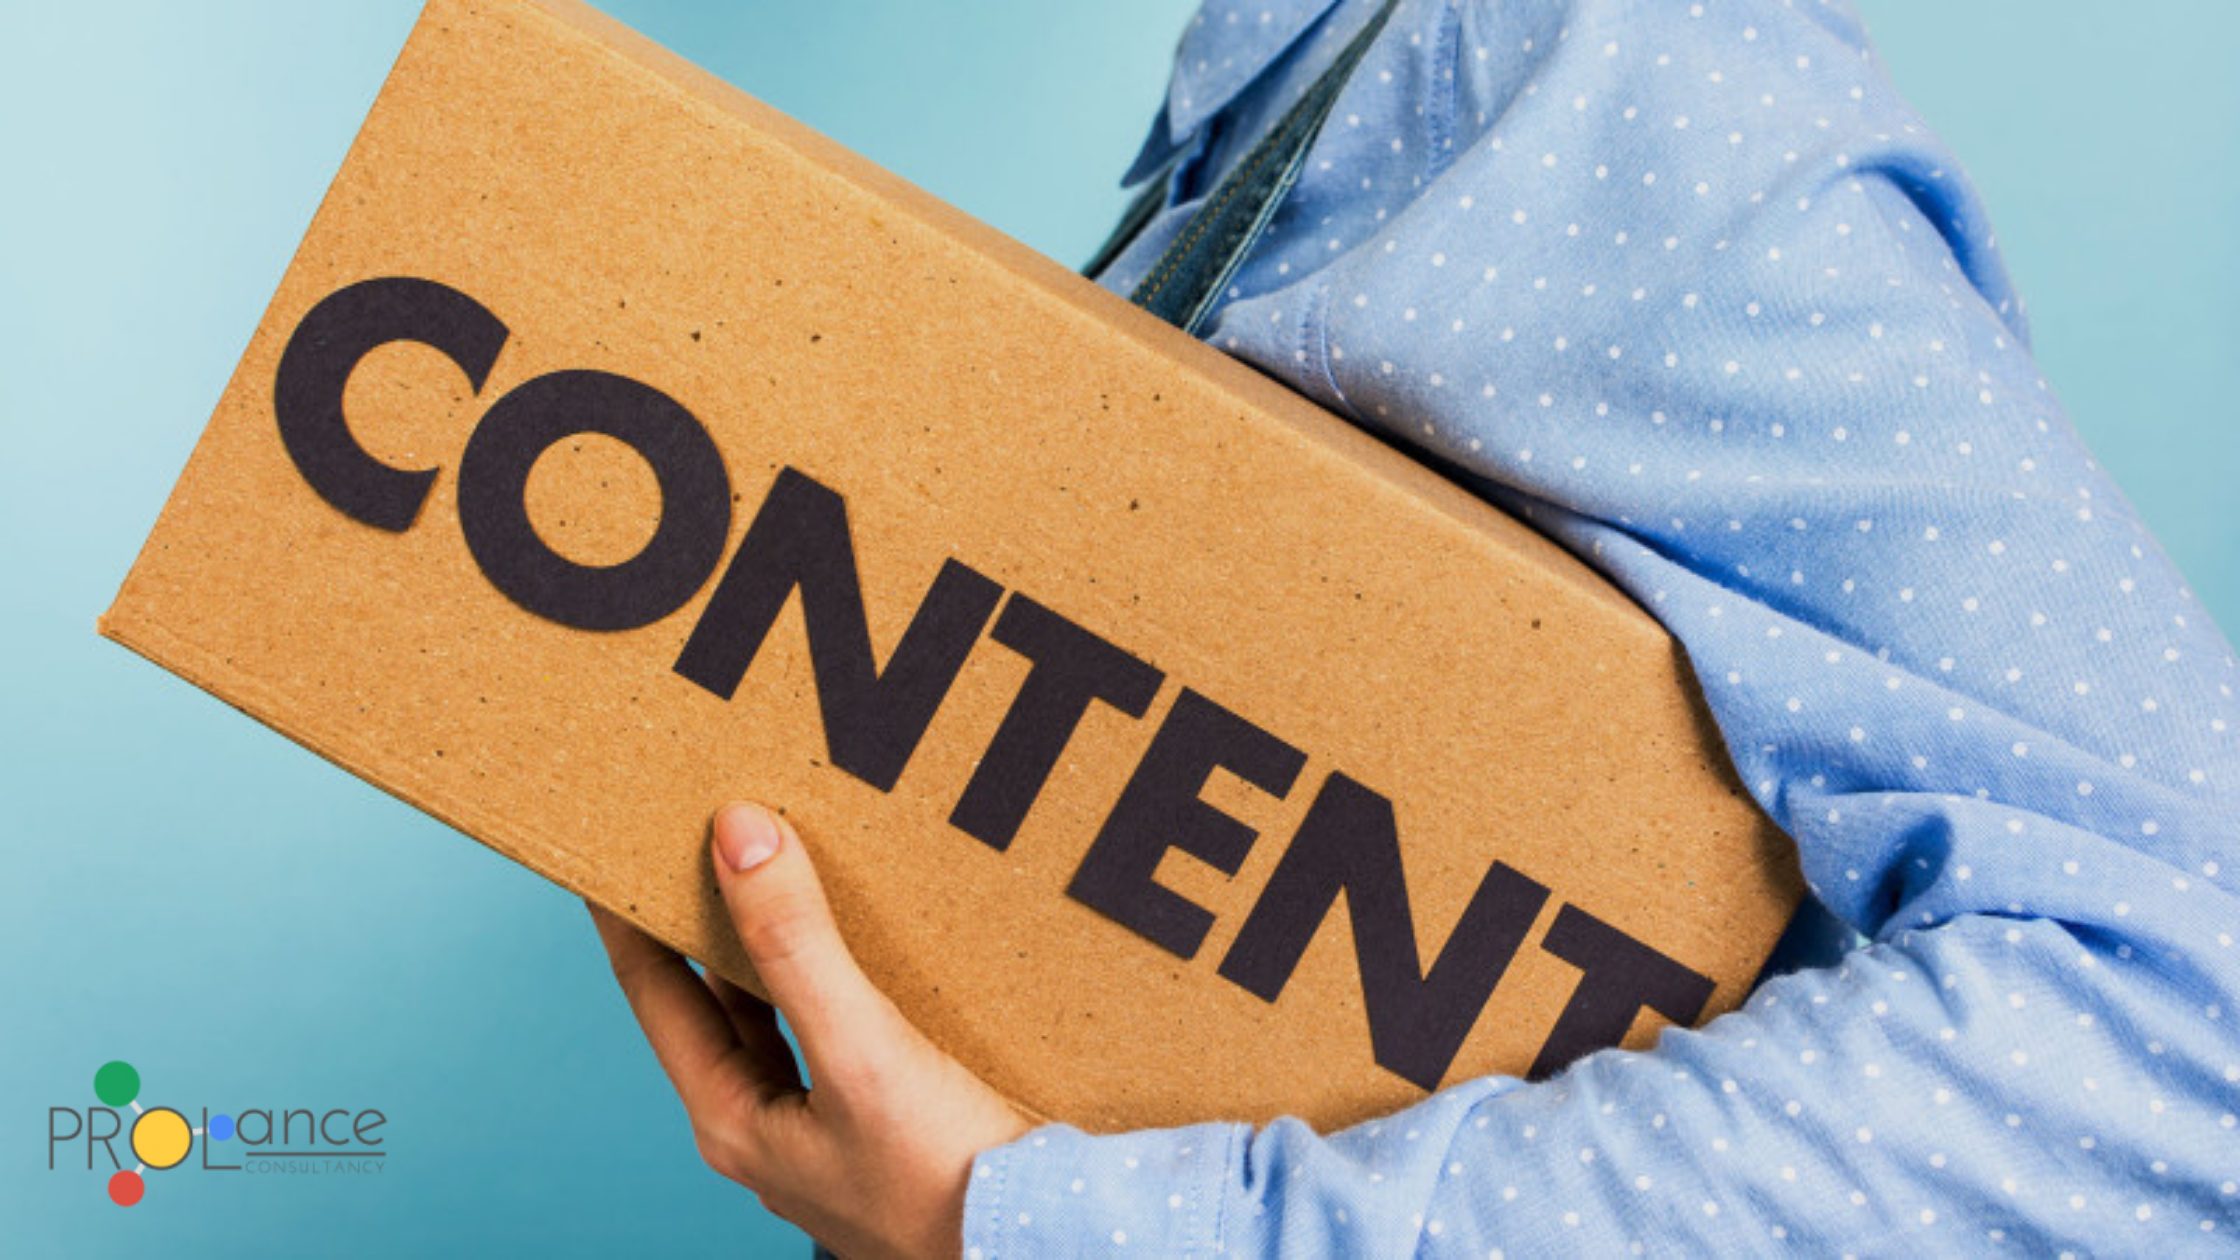 HOW TO OPTIMIZE MARKETABLE CONTENT – WEBSITE CONTENT OPTIMIZATION TIPS & GUIDE